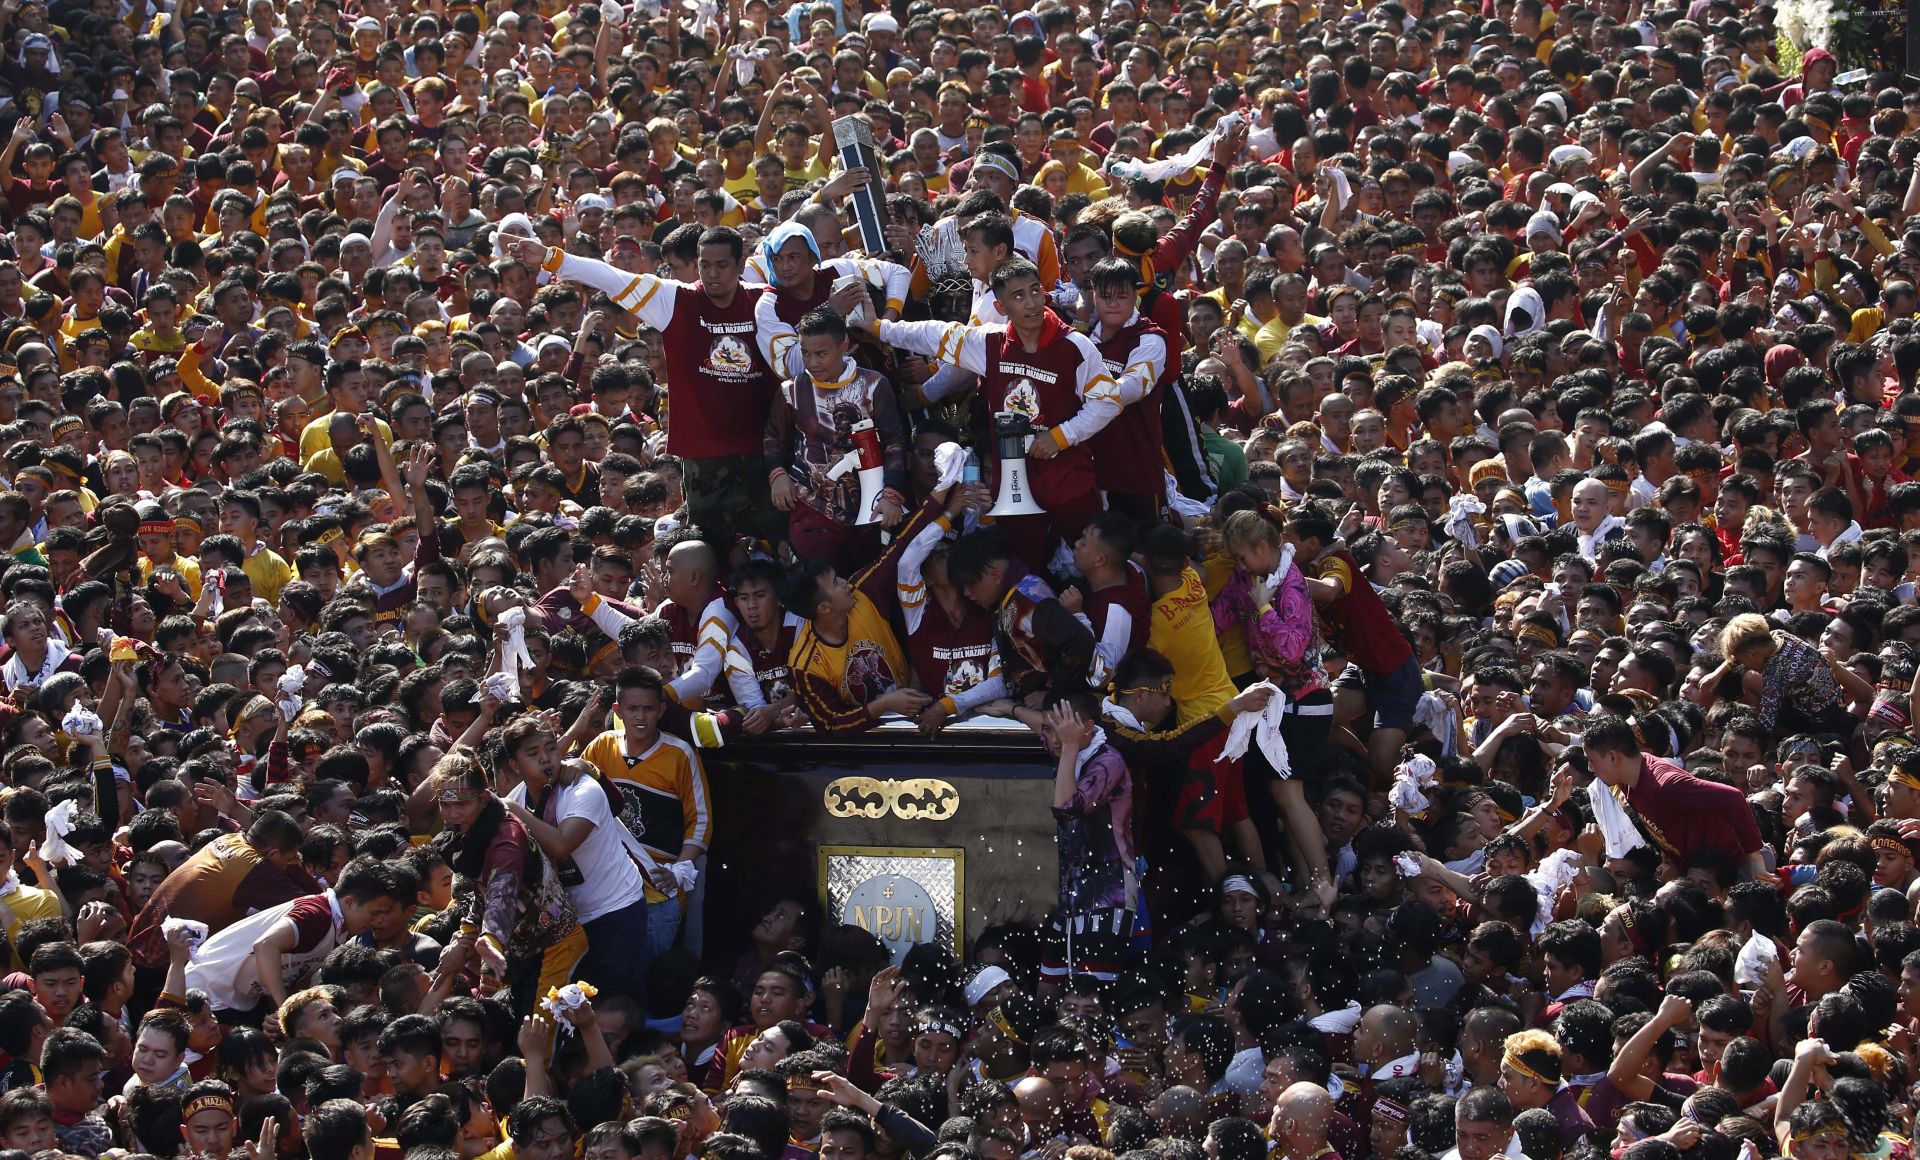 epa08113511 The Black Nazarene is taken on a procession as Catholic devotees flock around to mark its feast day in Manila, Philippines, 09 January 2020. The feast of the Black Nazarene is one of the most celebrated religious events in the predominantly Catholic Philippines, where more than 80 percent of the population professes the faith. The wooden statue, crowned with thorns and bearing a cross, is believed to have been brought from Mexico to Manila in 1606 by Spanish missionaries. The ship that carried it caught fire, but the charred statue survived and was named the Black Nazarene.  EPA/ROLEX DELA PENA